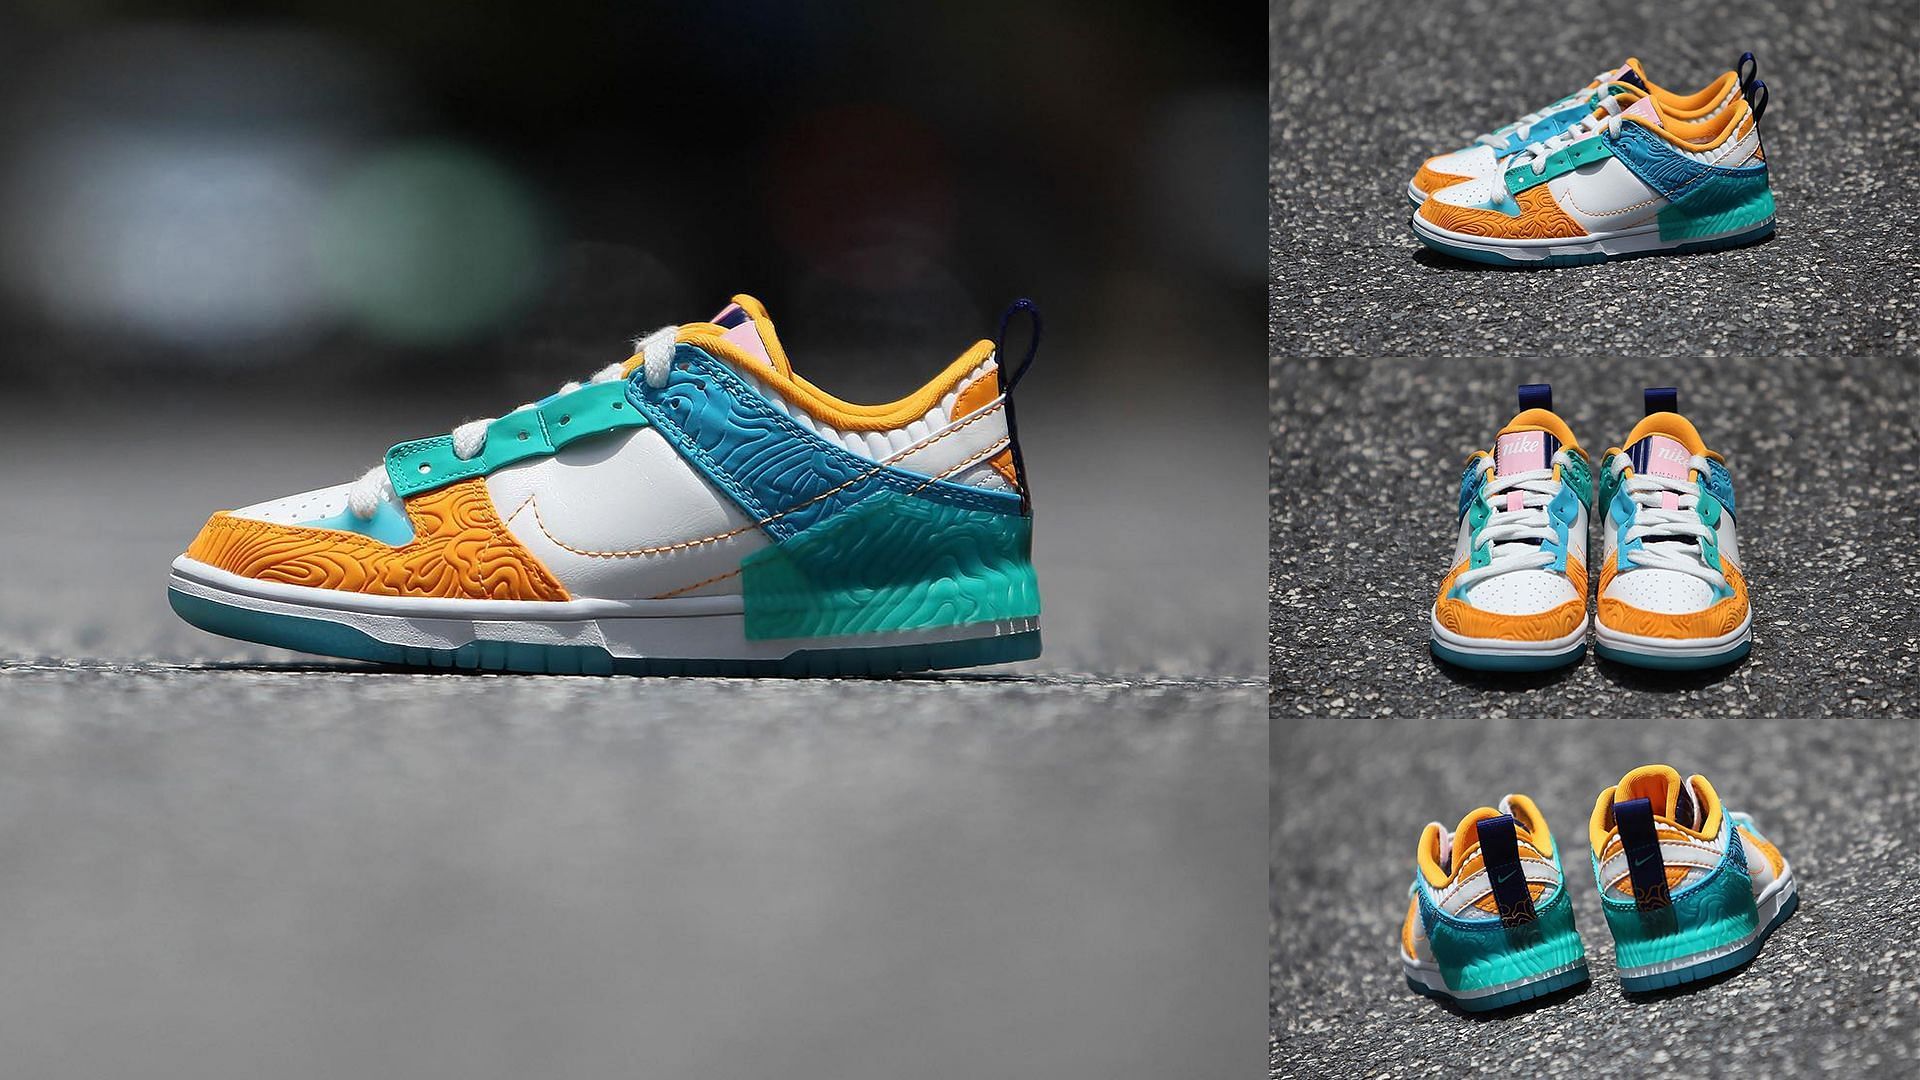 The upcoming Serena Williams Design Team x Nike Dunk Low Disrupt 2 sneakers come clad in multiple vibrant hues (Image via Sportskeeda)